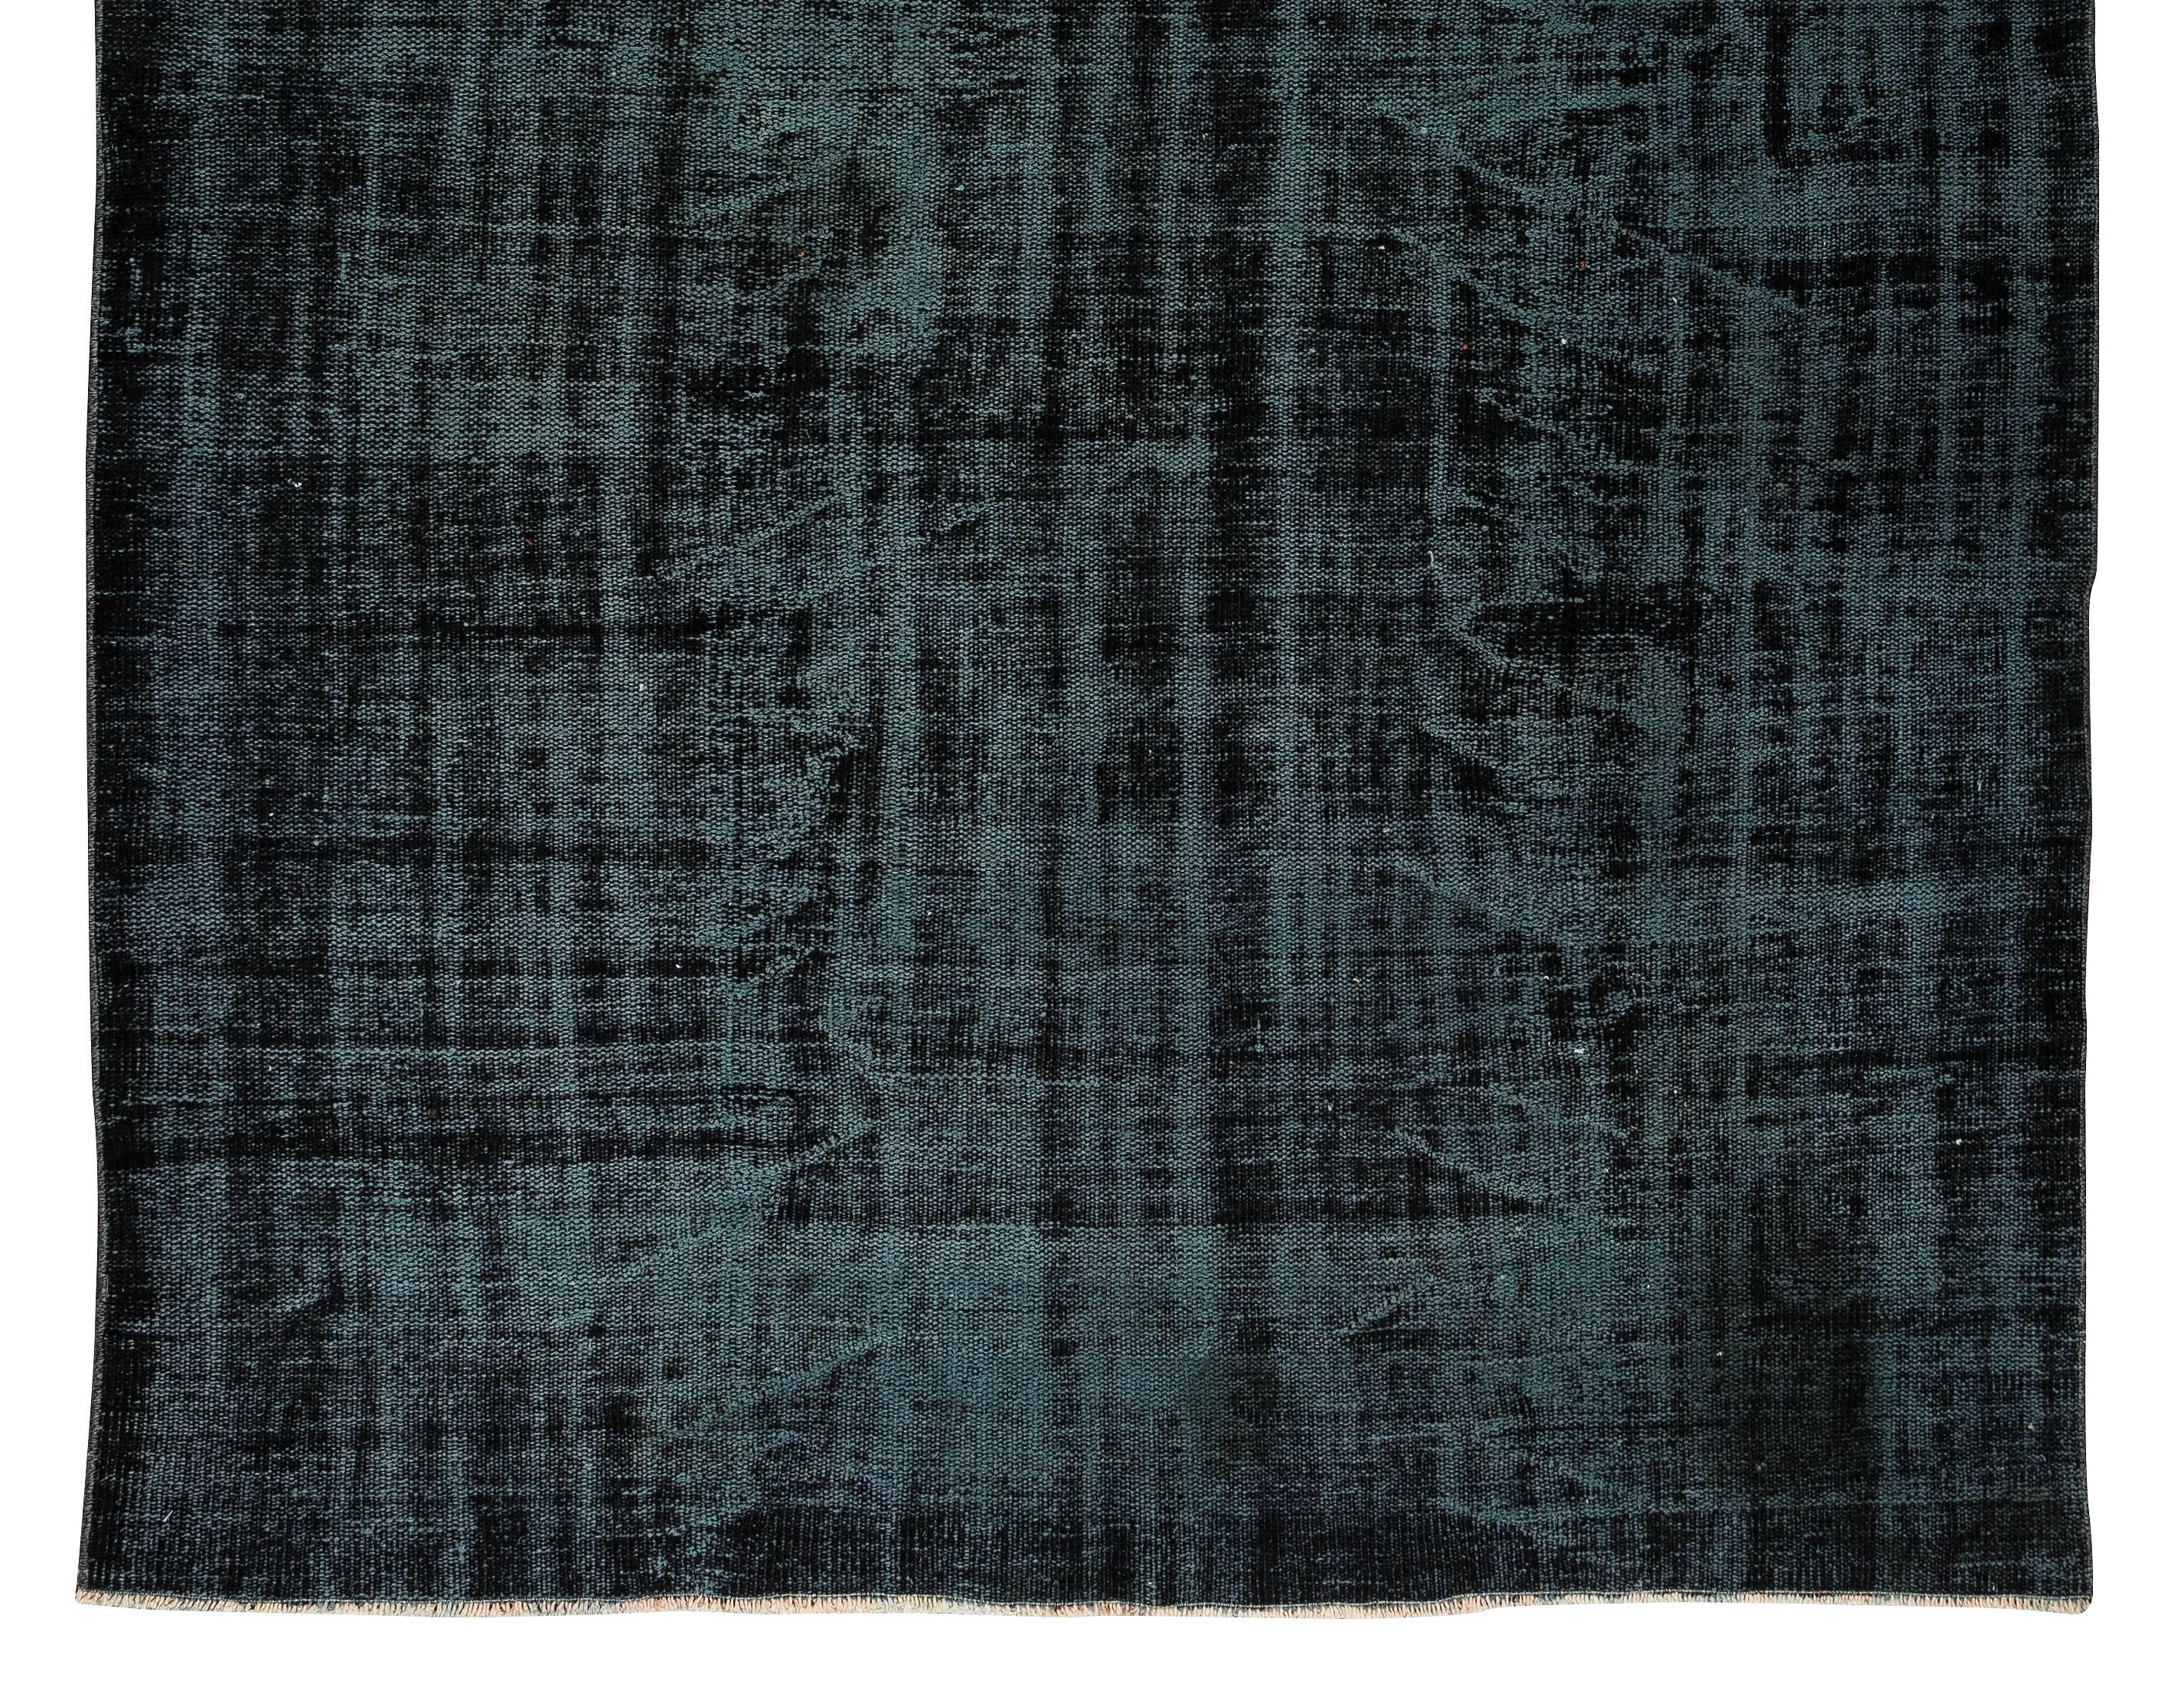 Hand-Knotted 6x9 Ft Handmade Vintage Turkish Area Rug in Plain Black 4 Modern Interiors For Sale